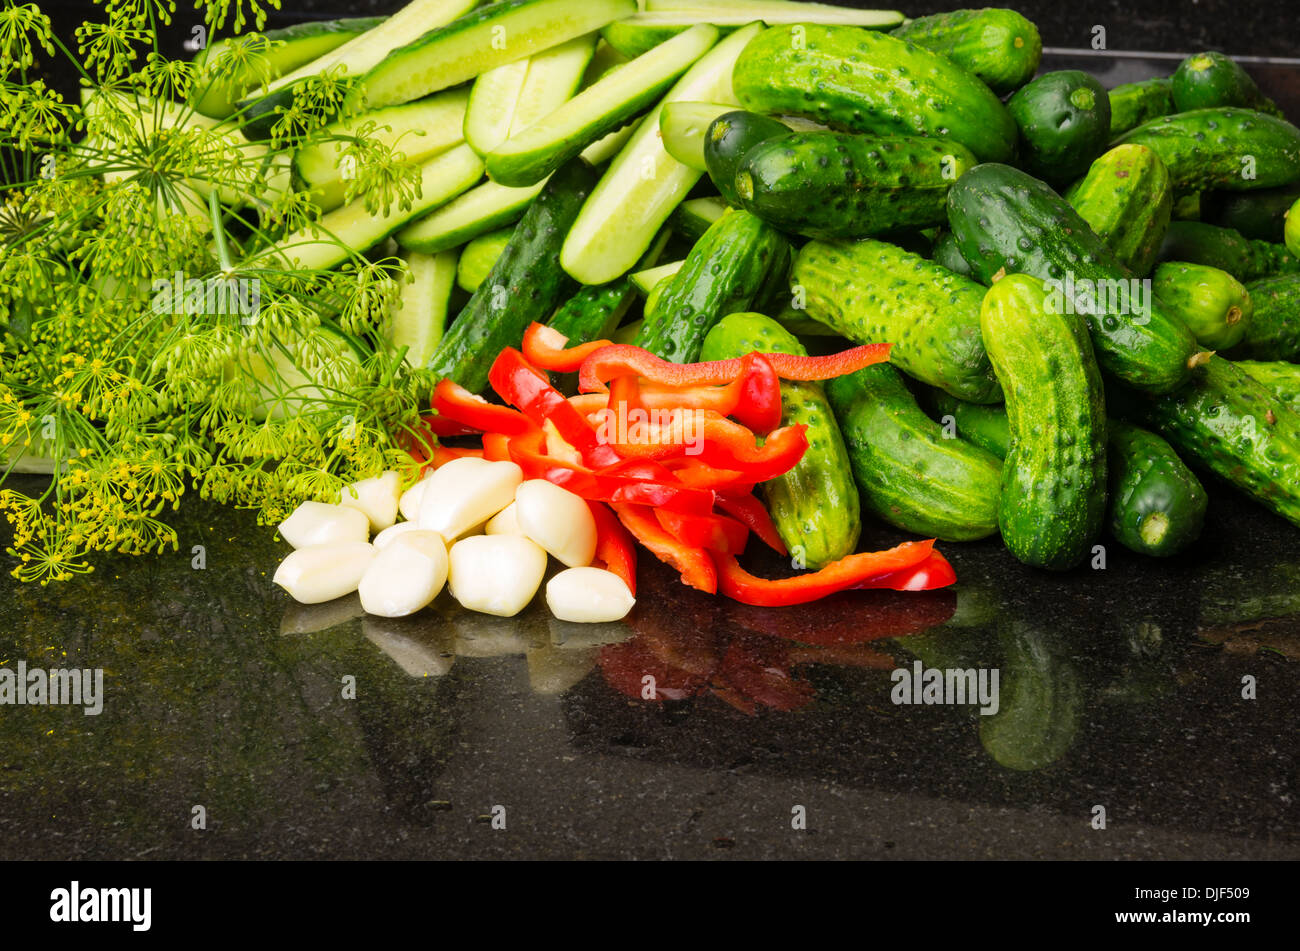 Fresh ingredients for pickling or making pickles Stock Photo